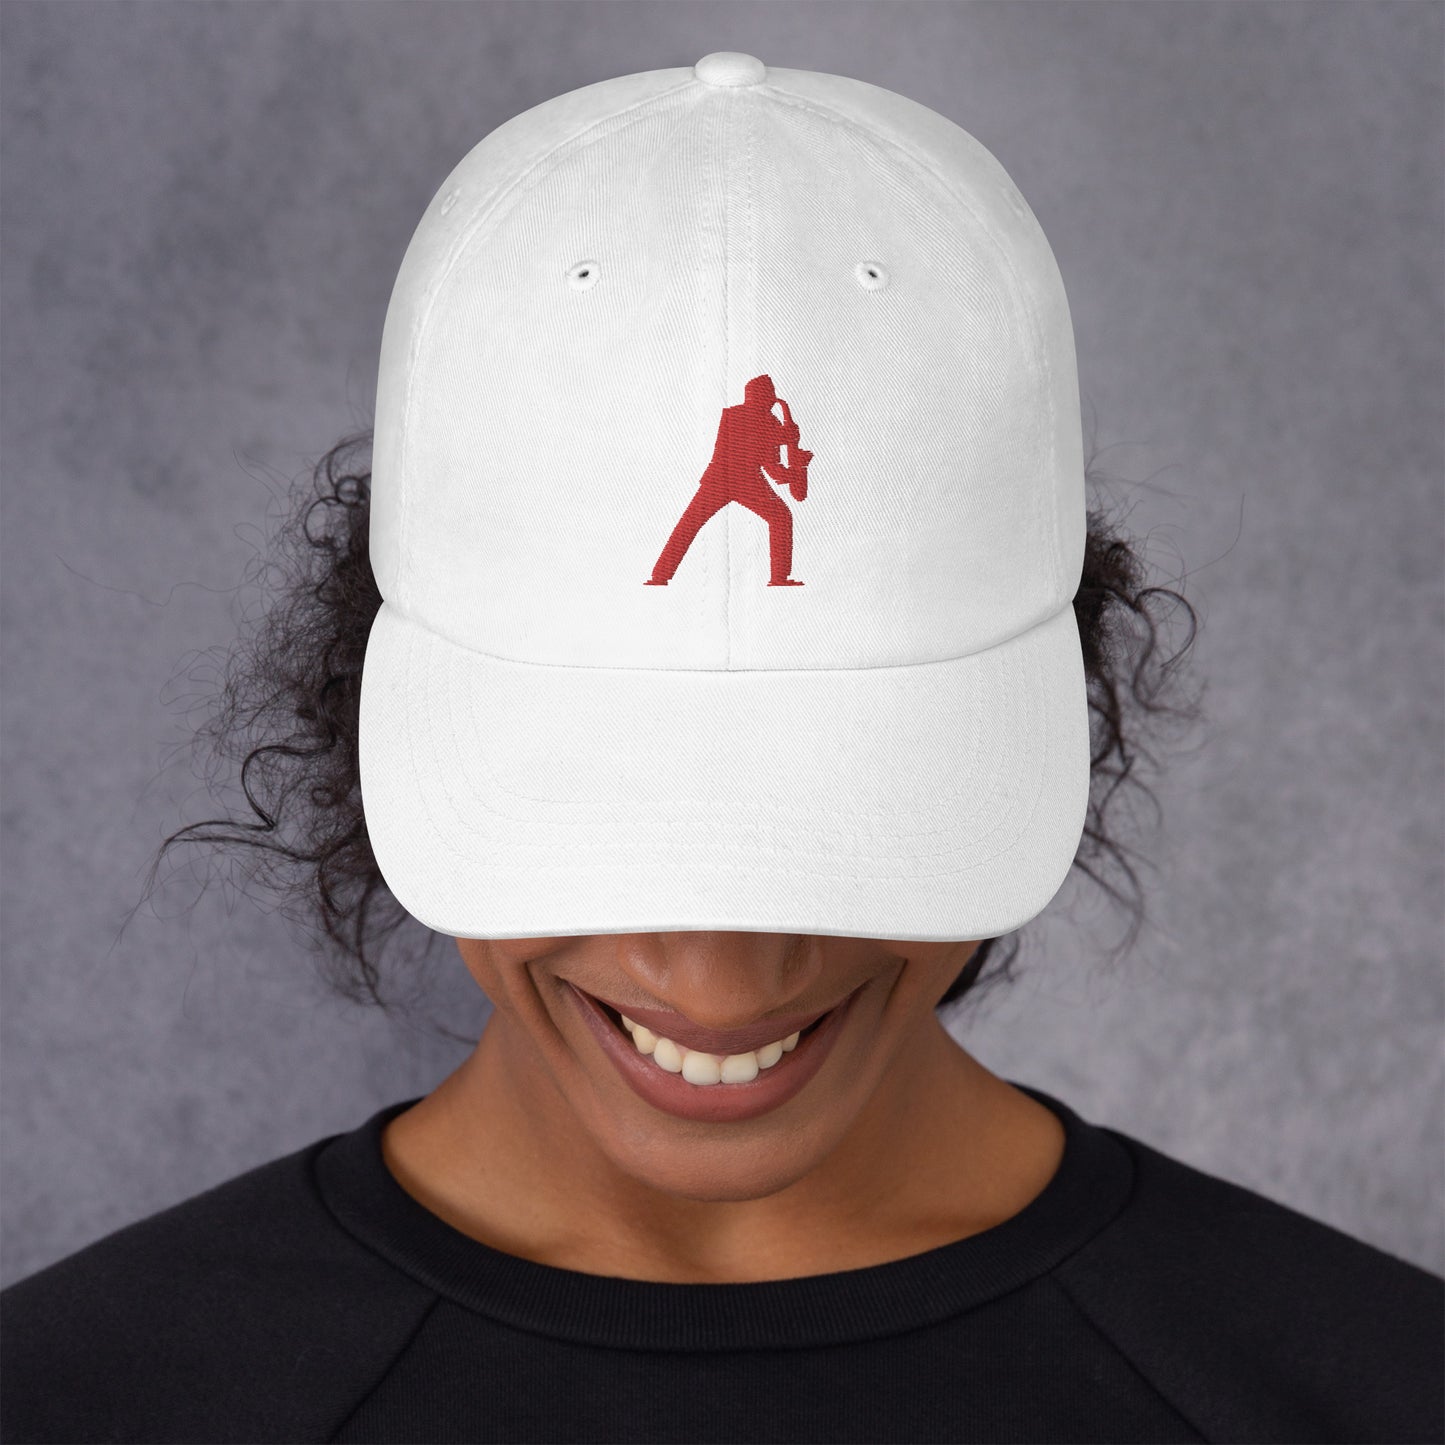 Sax Man Cotton Cap (Available in more colors)